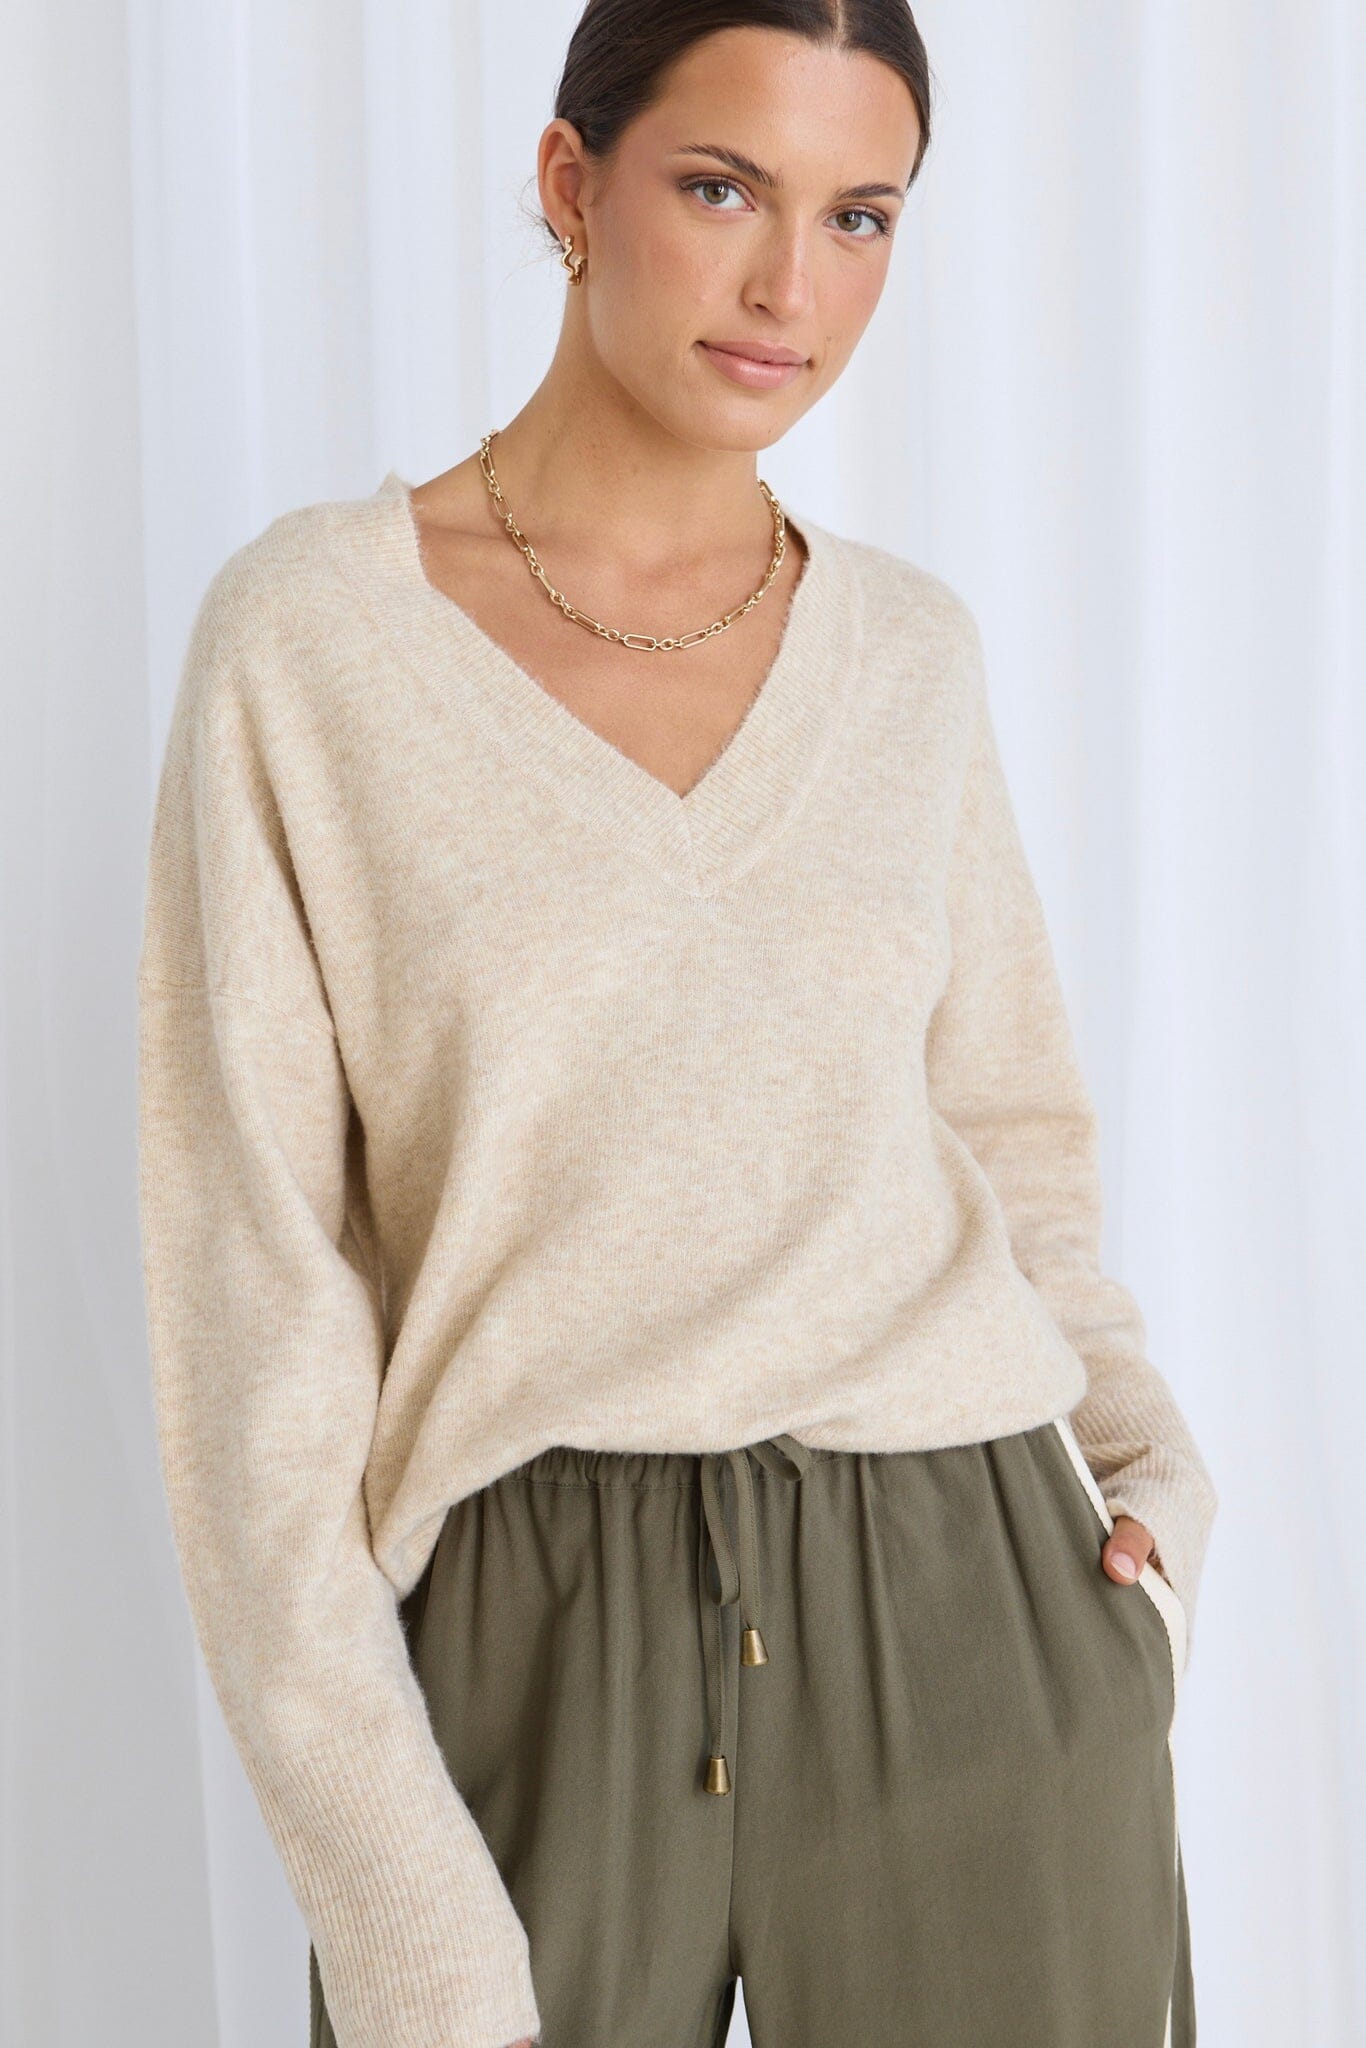 Stories Be Told - Quinn V Neck Fine Knit Jumper - Oat Womens Stories Be Told